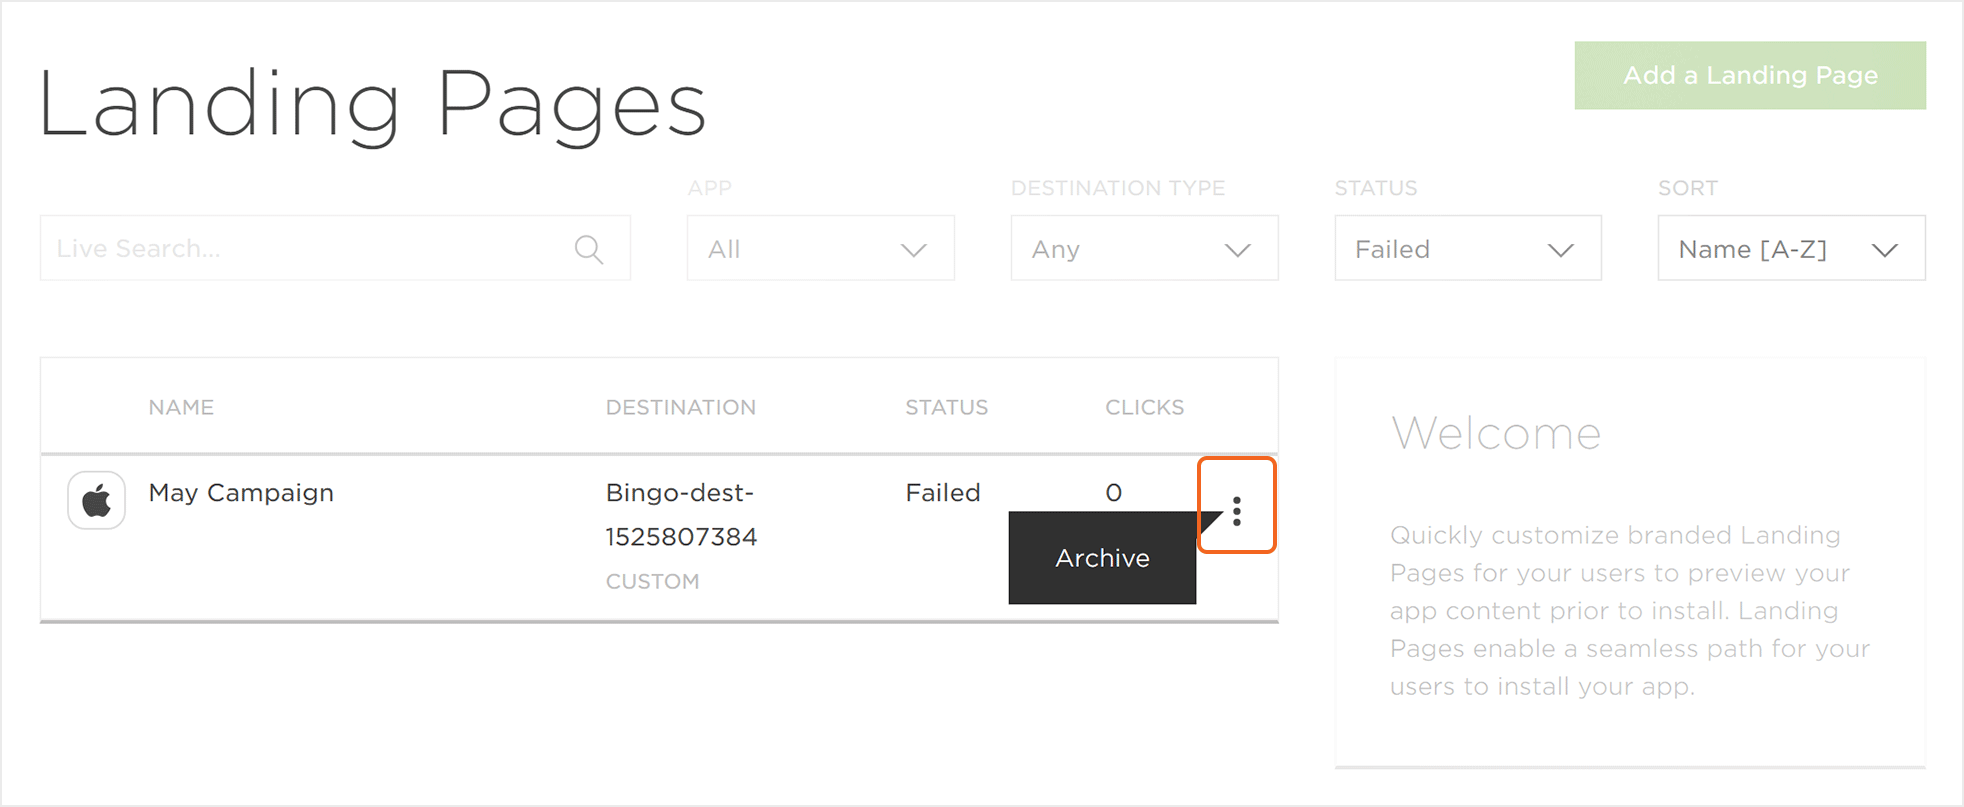 Failed Landing Pages